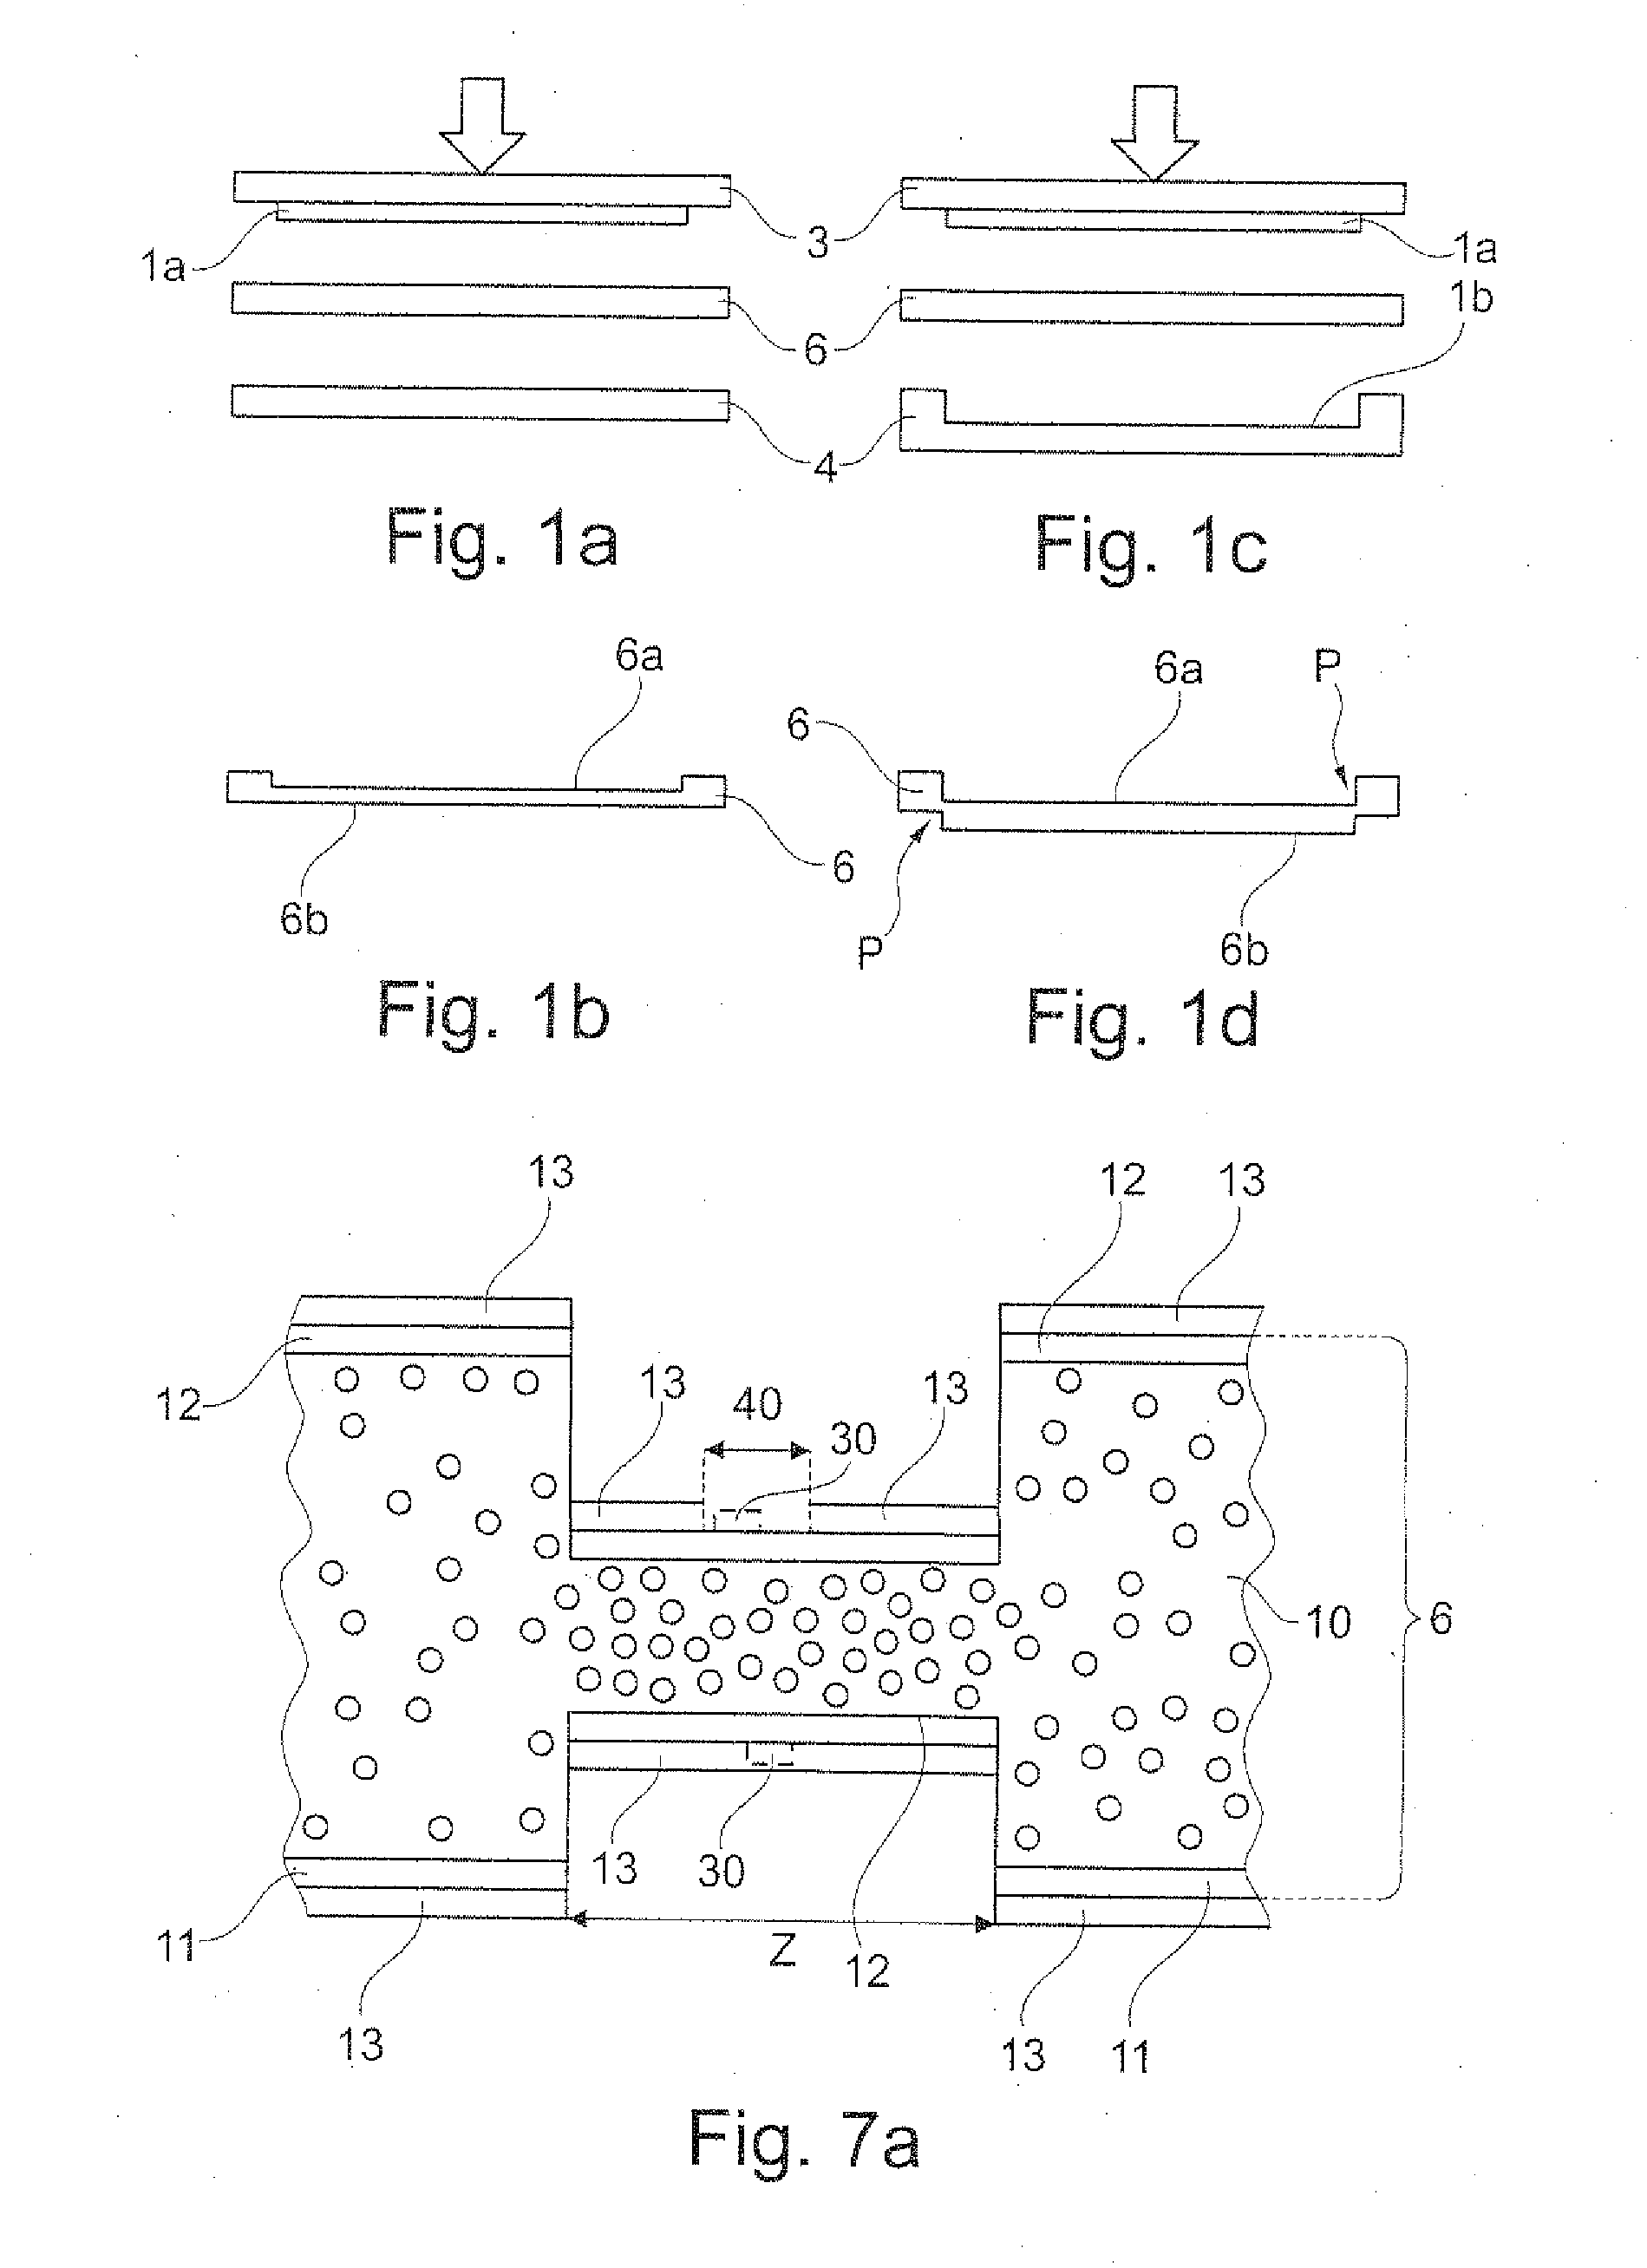 Method for manufacturing a sheet by means of compregnation in order to form an area made transparent